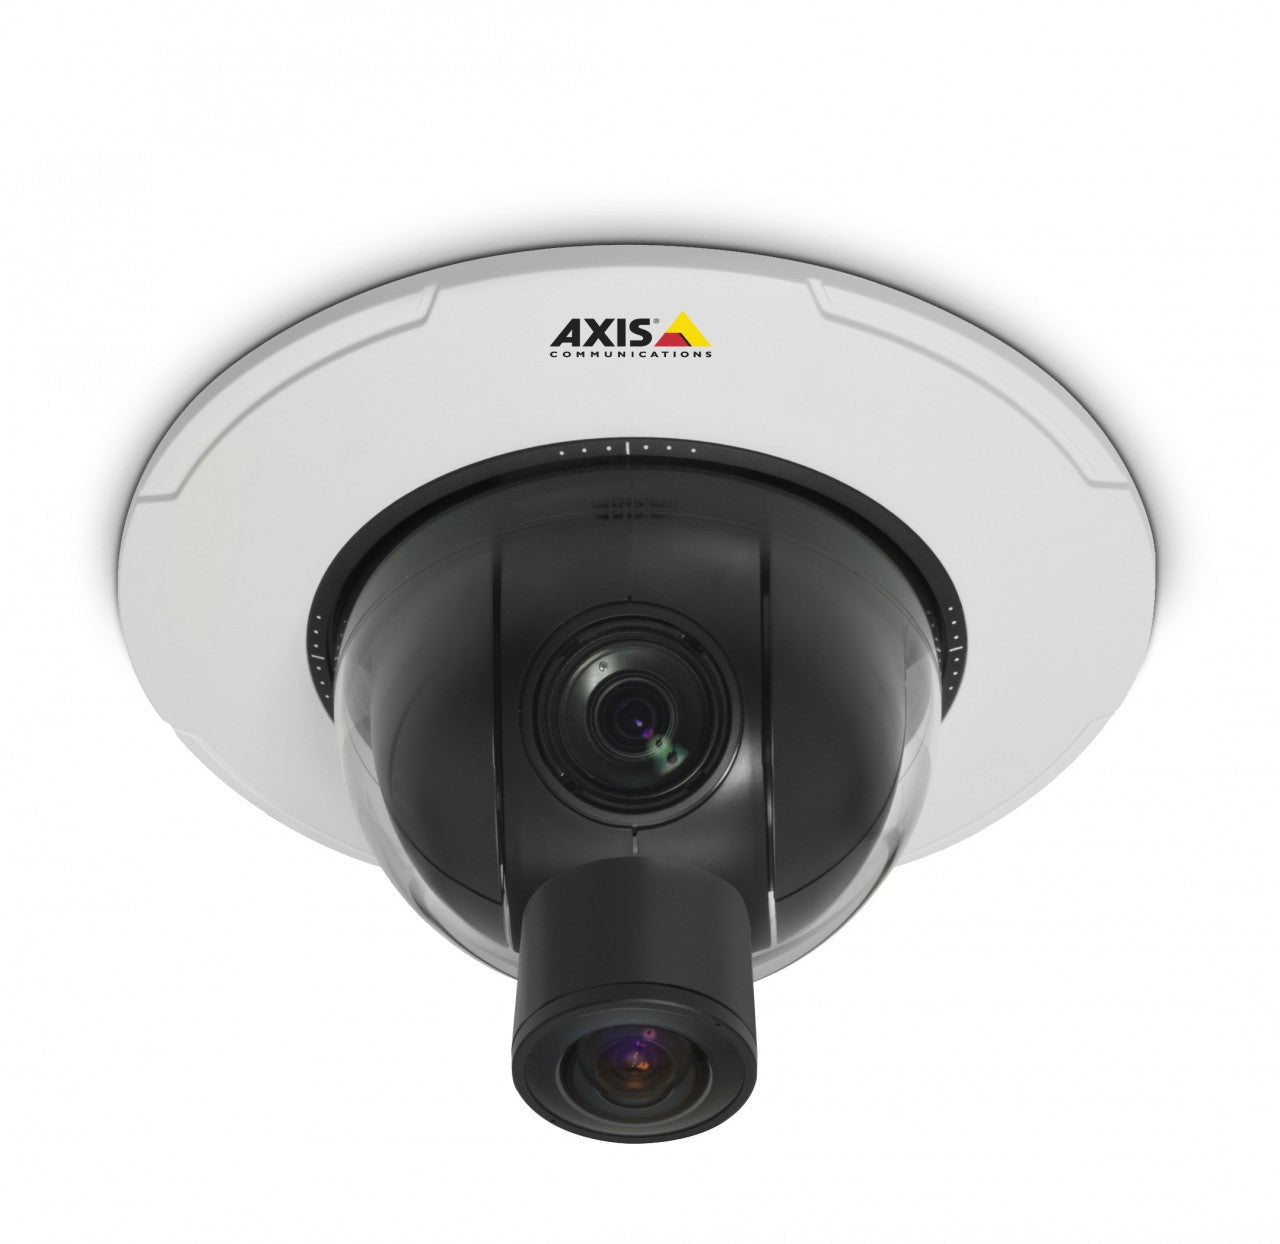 AXIS P5544 (0443-004) PTZ Dome Network Camera